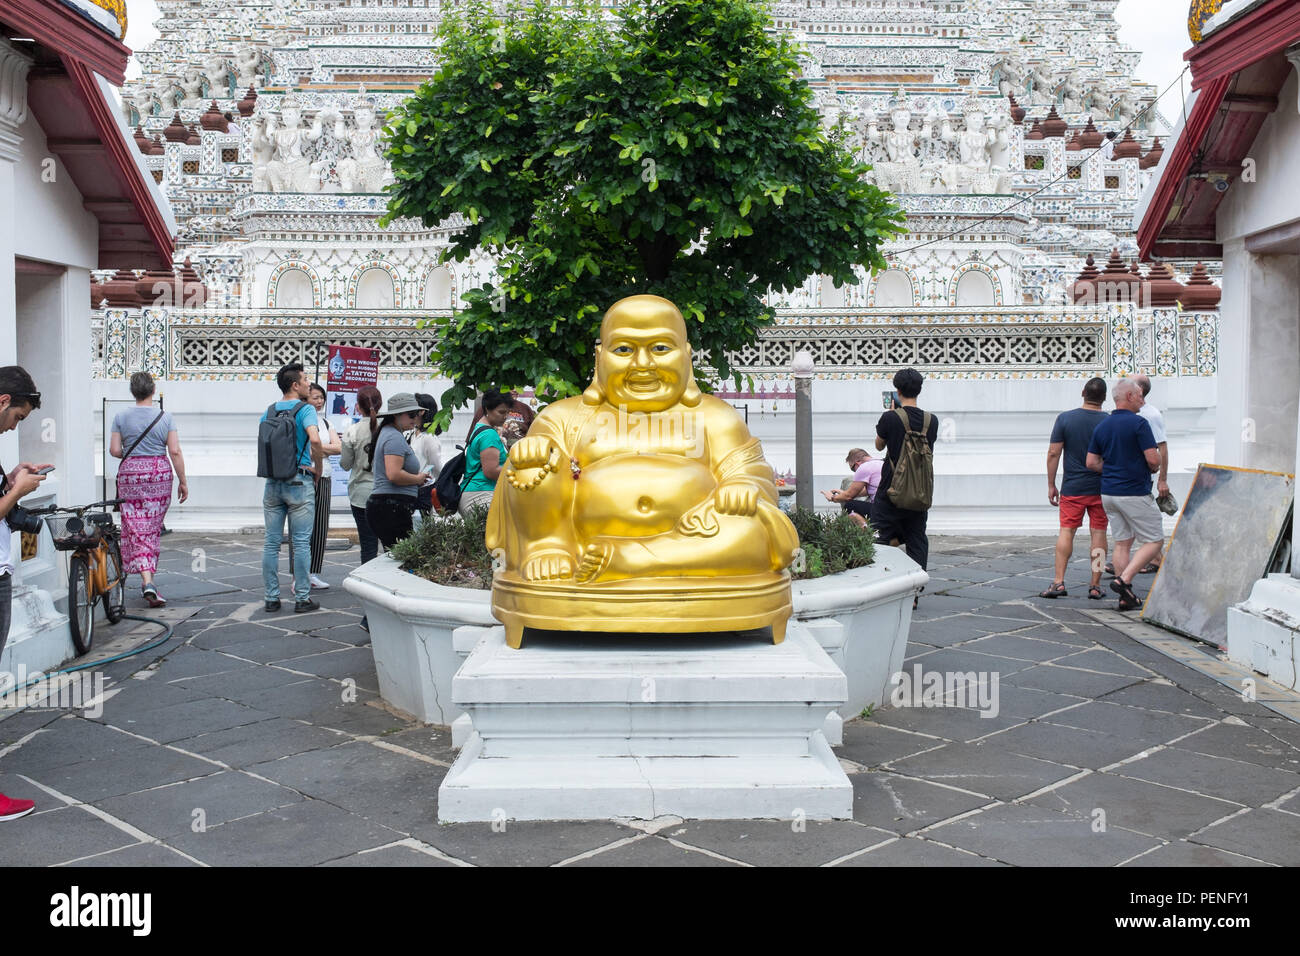 Gold Buddha statue at Wat Arun or the Temple of Dawn on the bank of the Chao Phraya River in Bangkok, Thailand Stock Photo